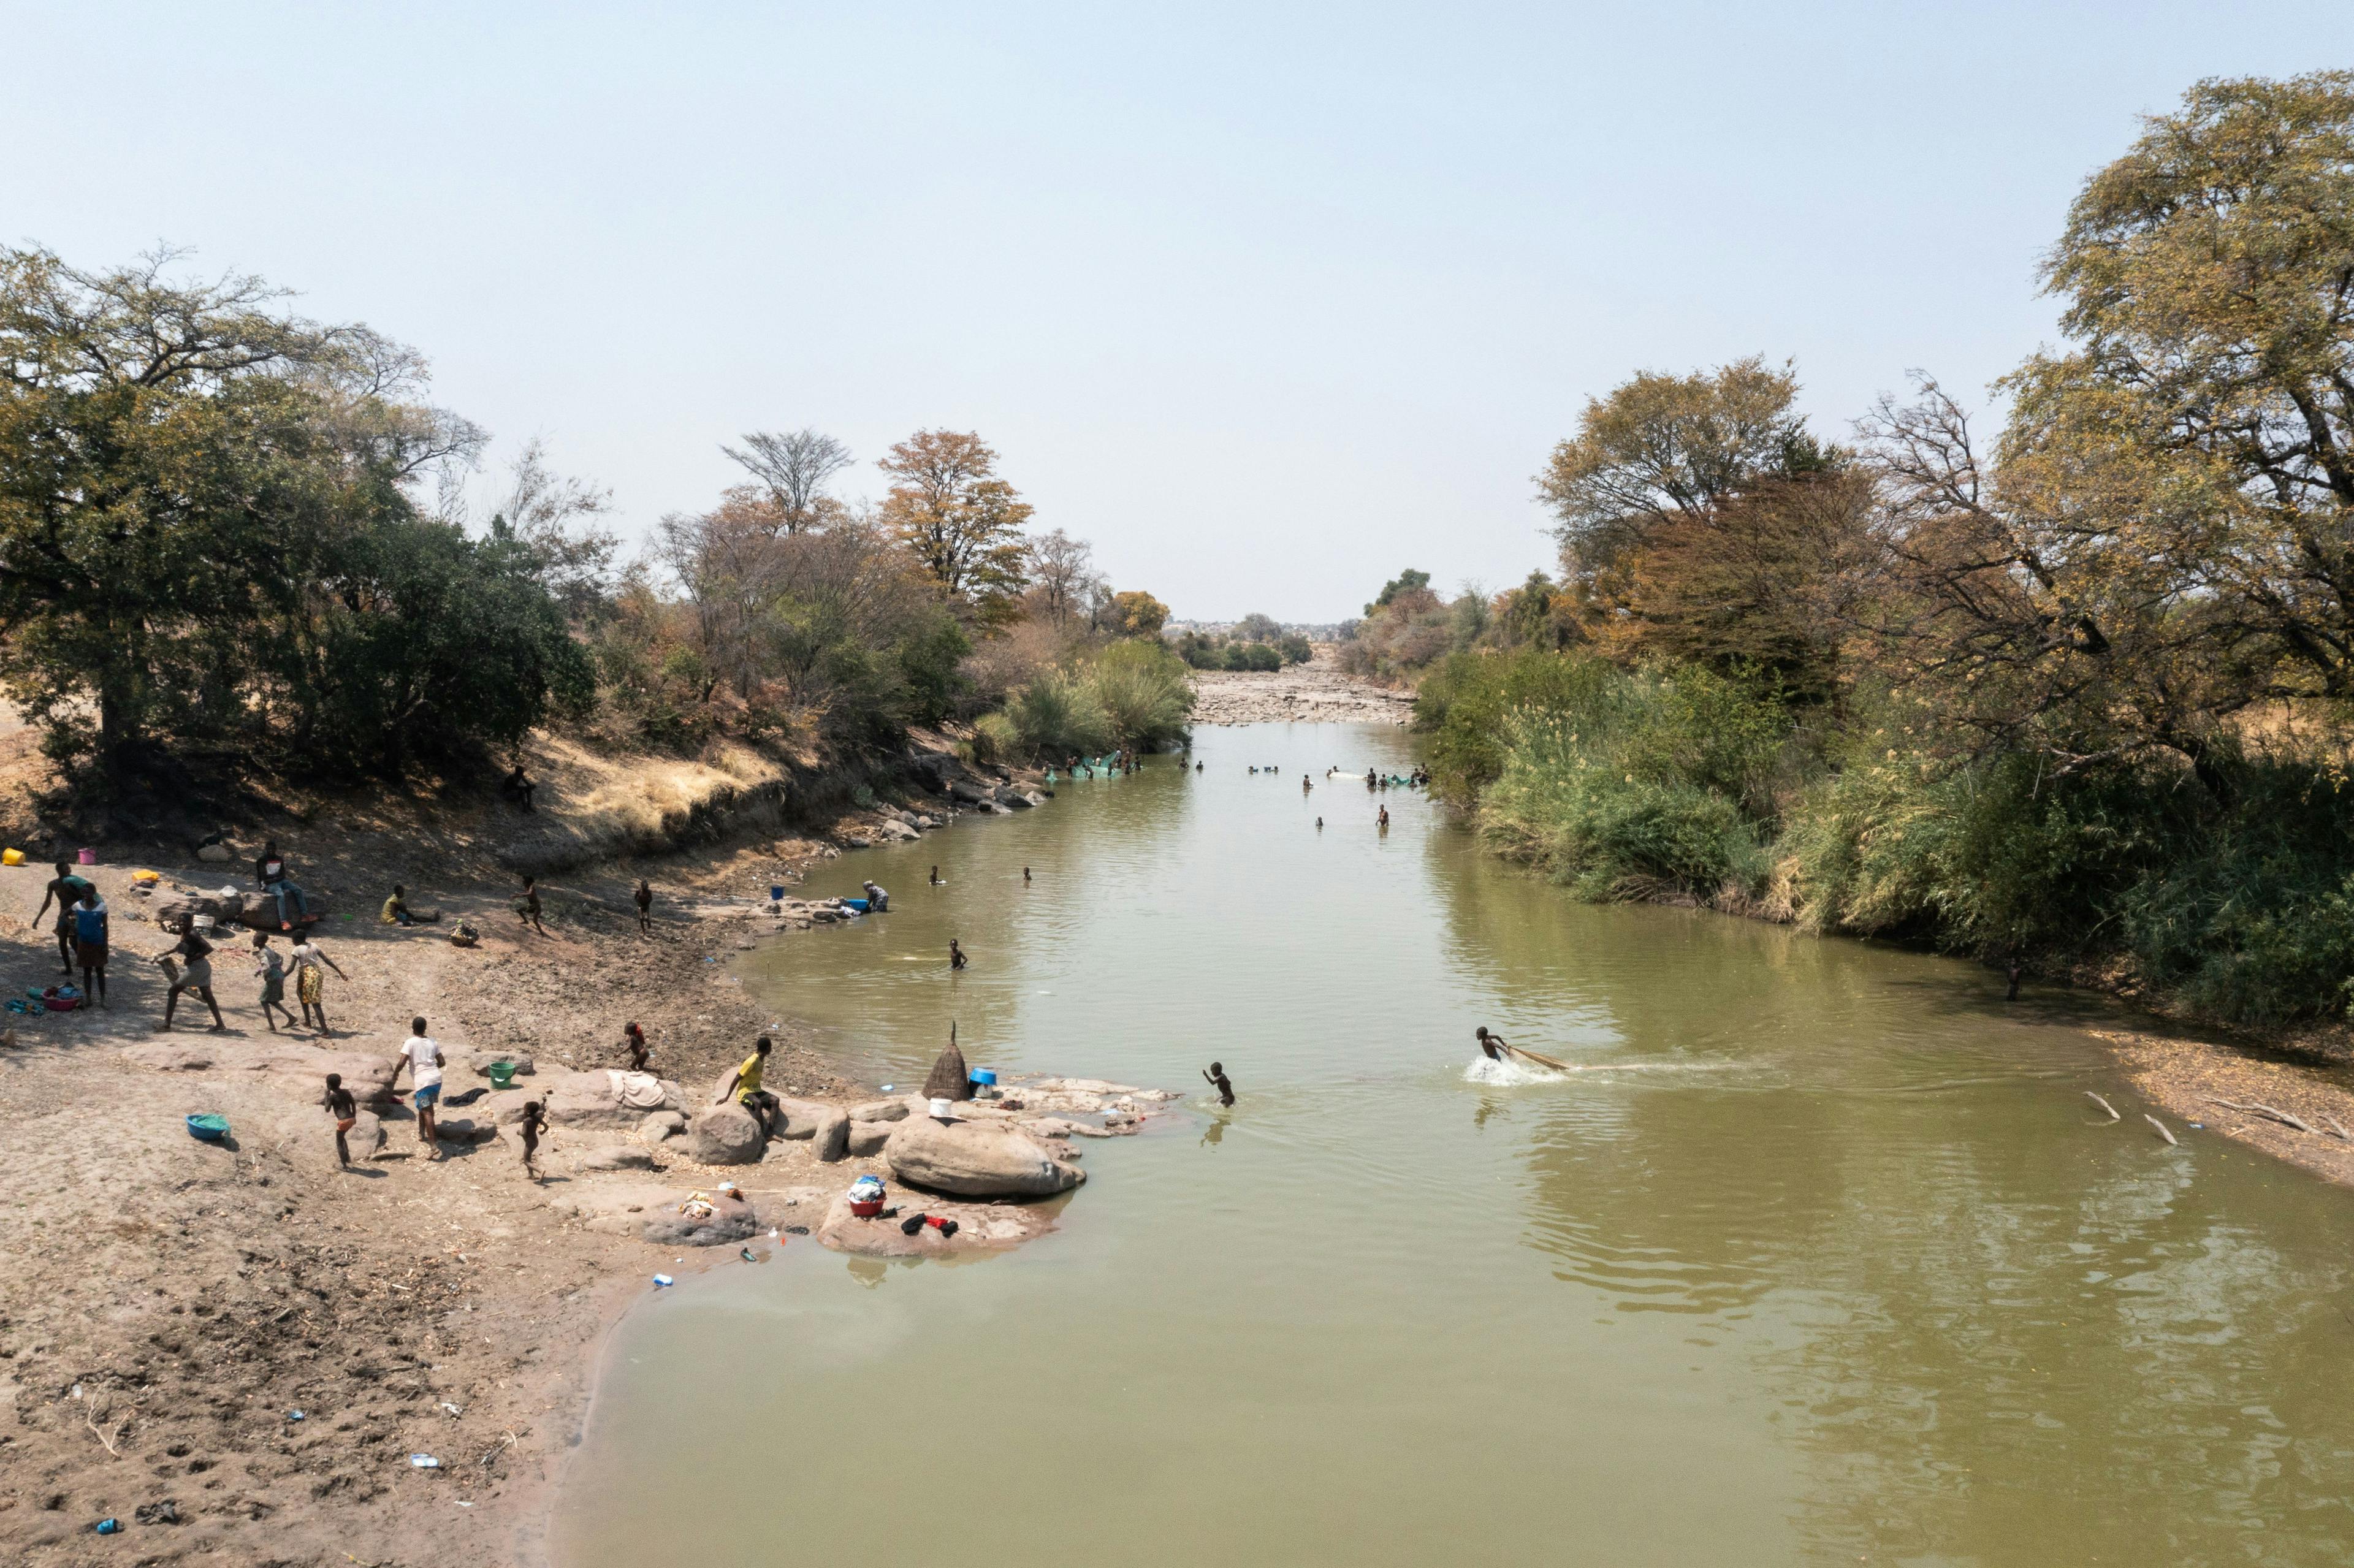 People take to the river to wash their clothing and cool off. Climate change will make some parts of Africa better suited to farming and will draw people to areas where, at least in the near term, water availability improves.  